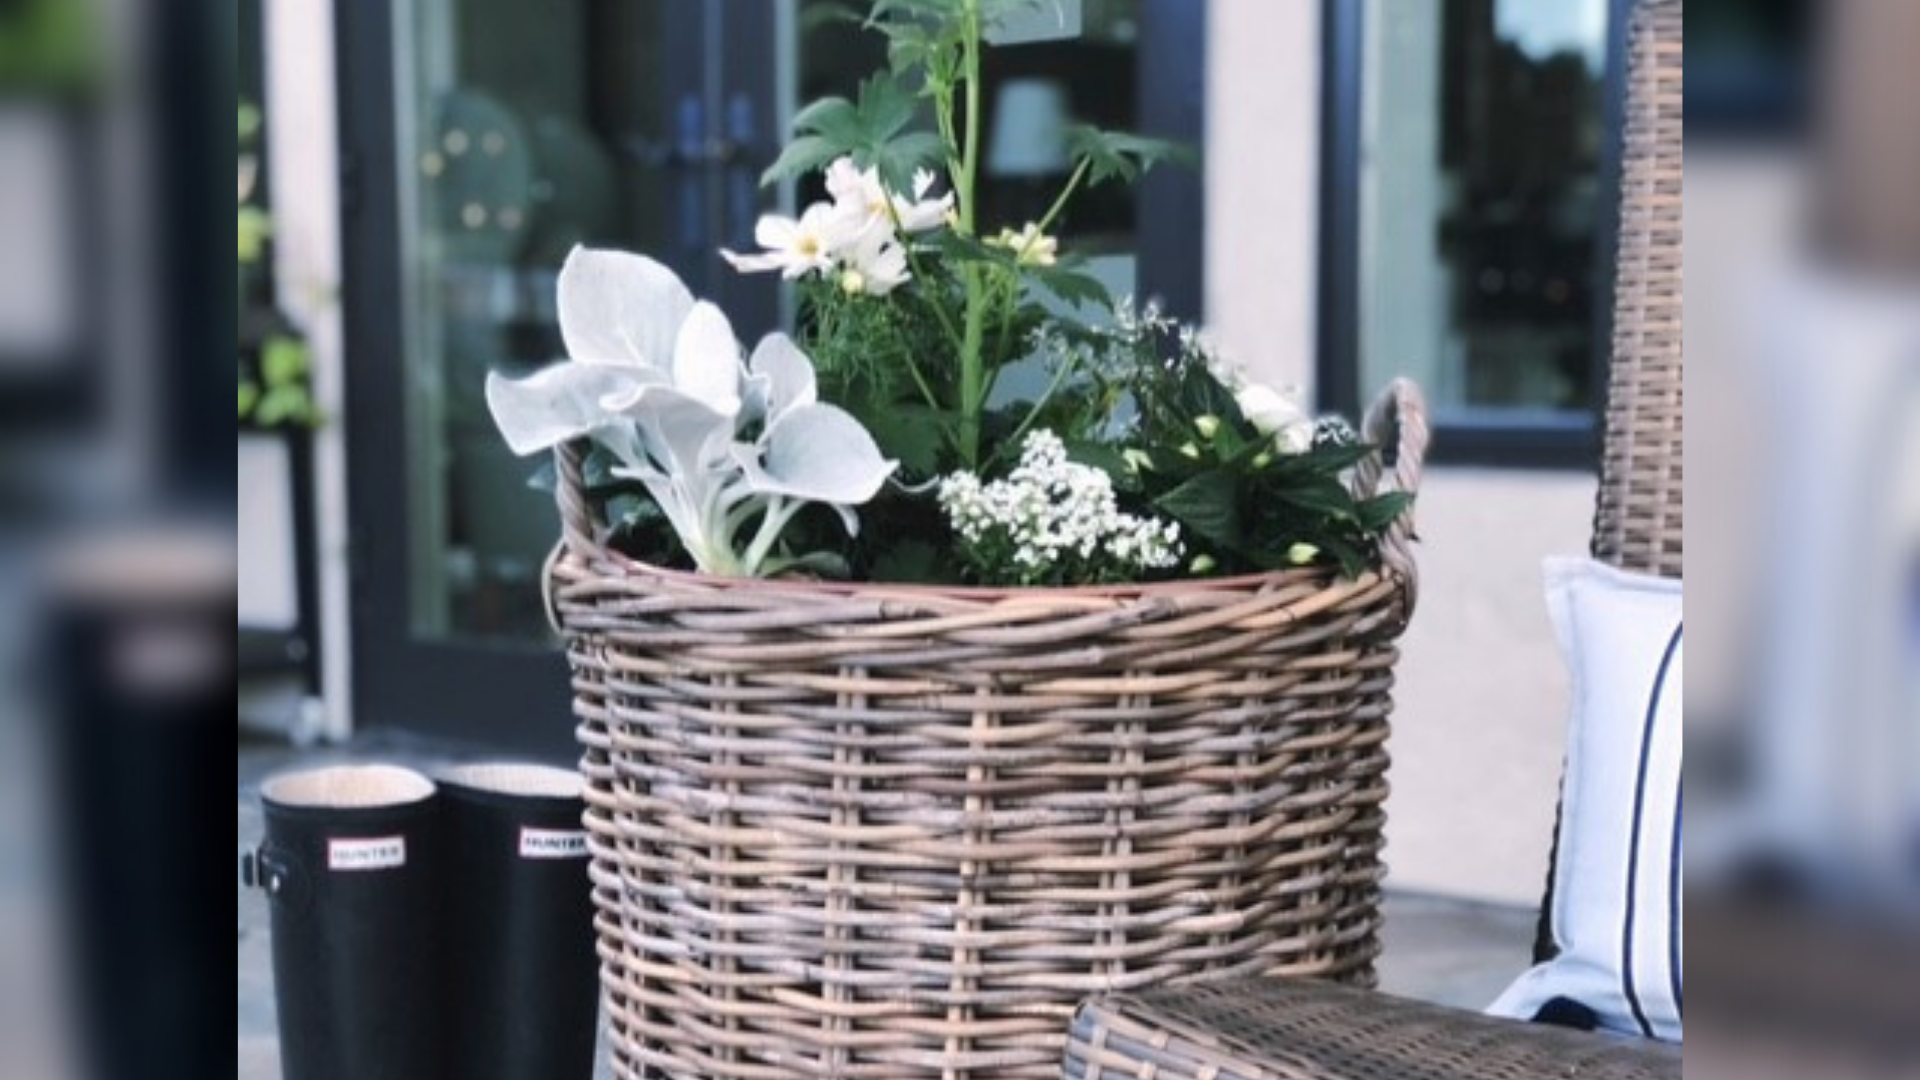 Using a basket is a unique way to showcase plants that glow 🌟🌿 Sponsored by 425 Magazine.